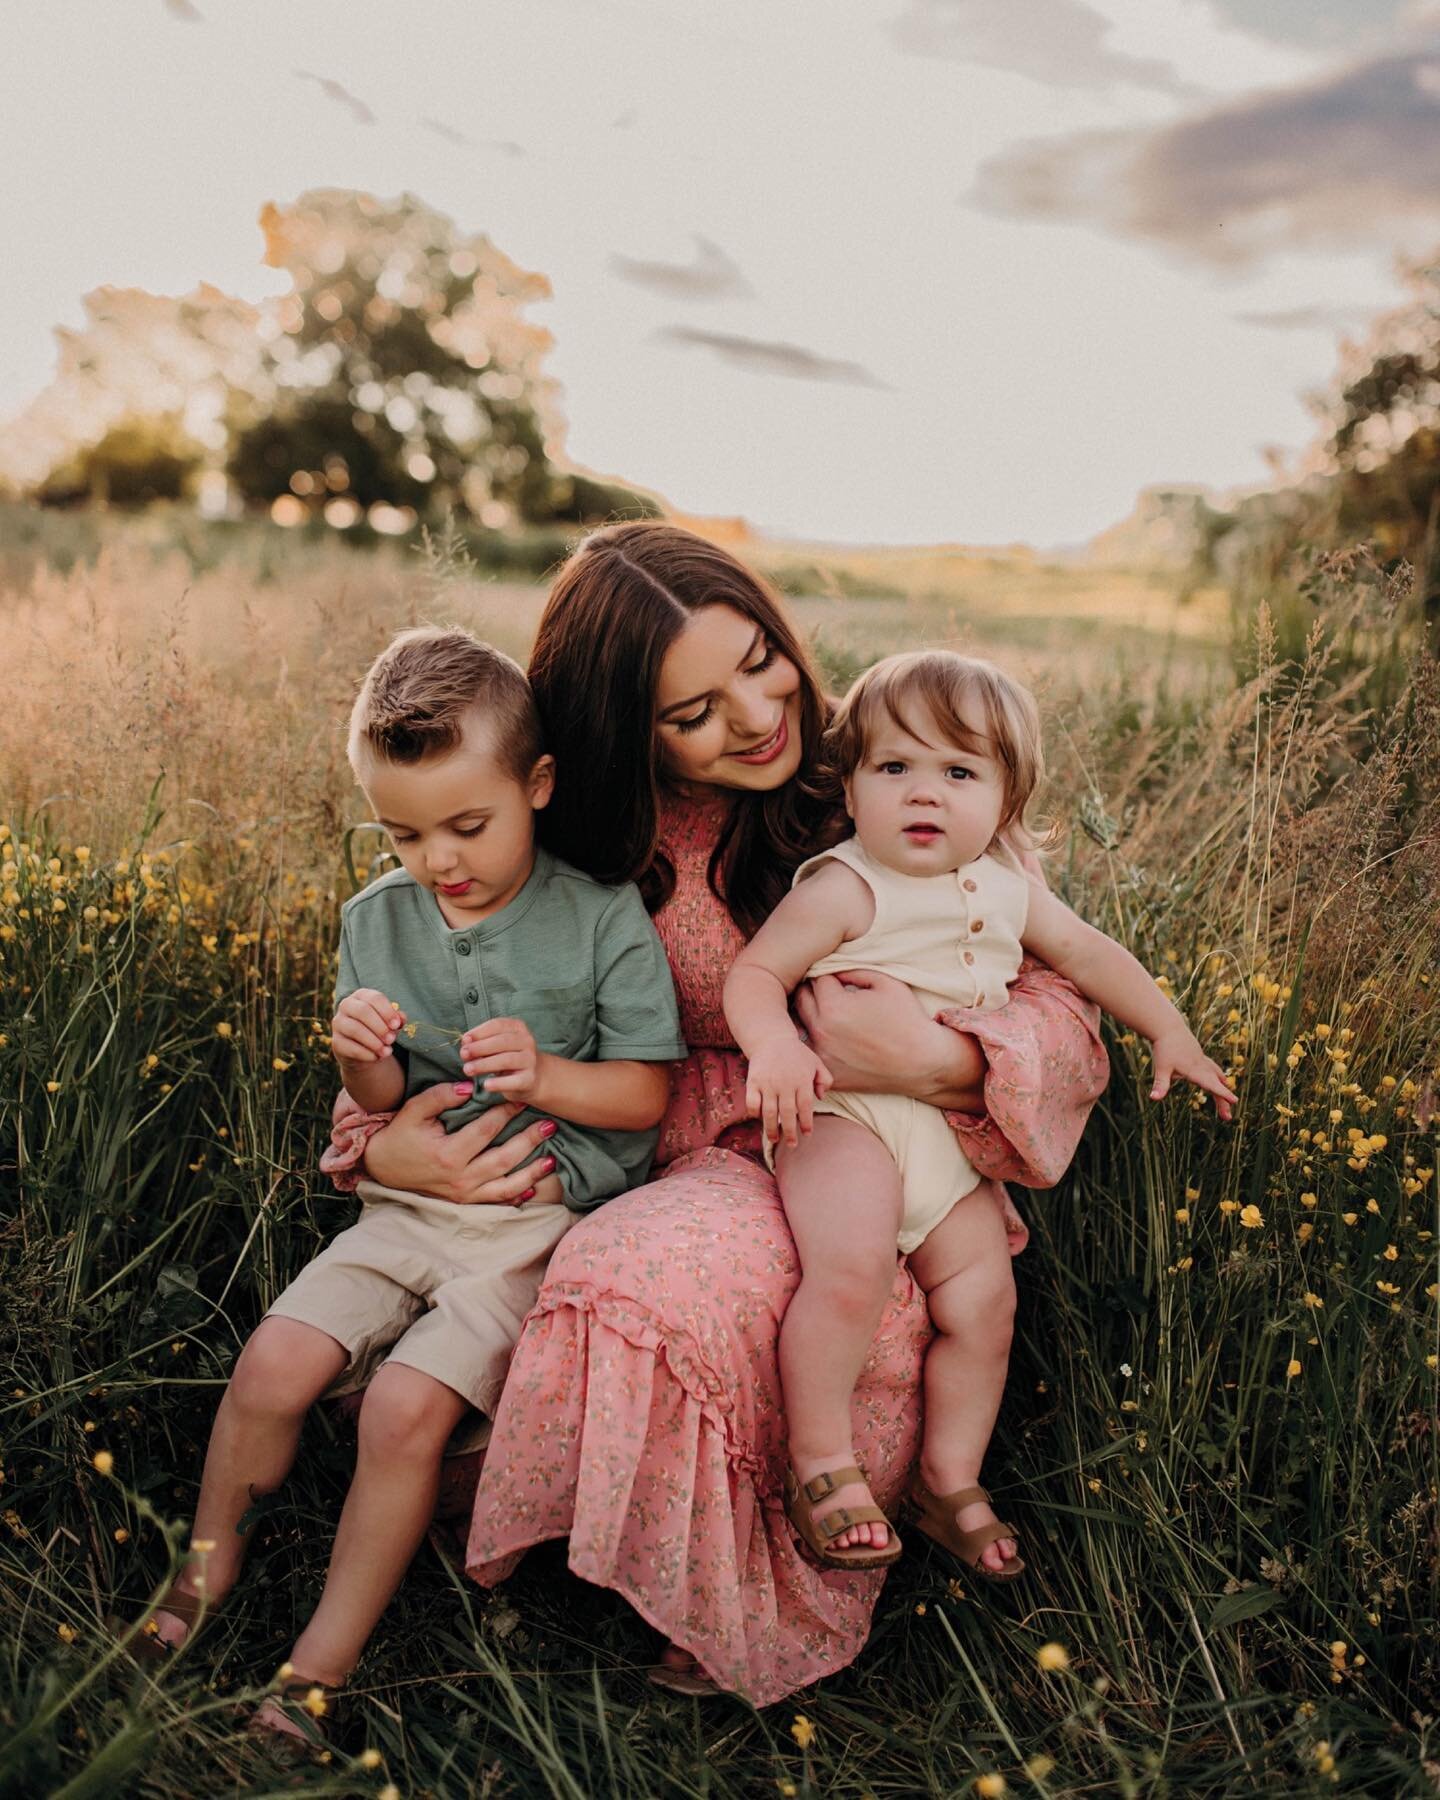 Jessica and her precious baby boys! I melt every time I photograph this sweet crew! I feel so honored that this Momma has trusted me to document so much for her dear family!

I&rsquo;ve been pondering about a Mommy and Me Giveaway for the end of summ